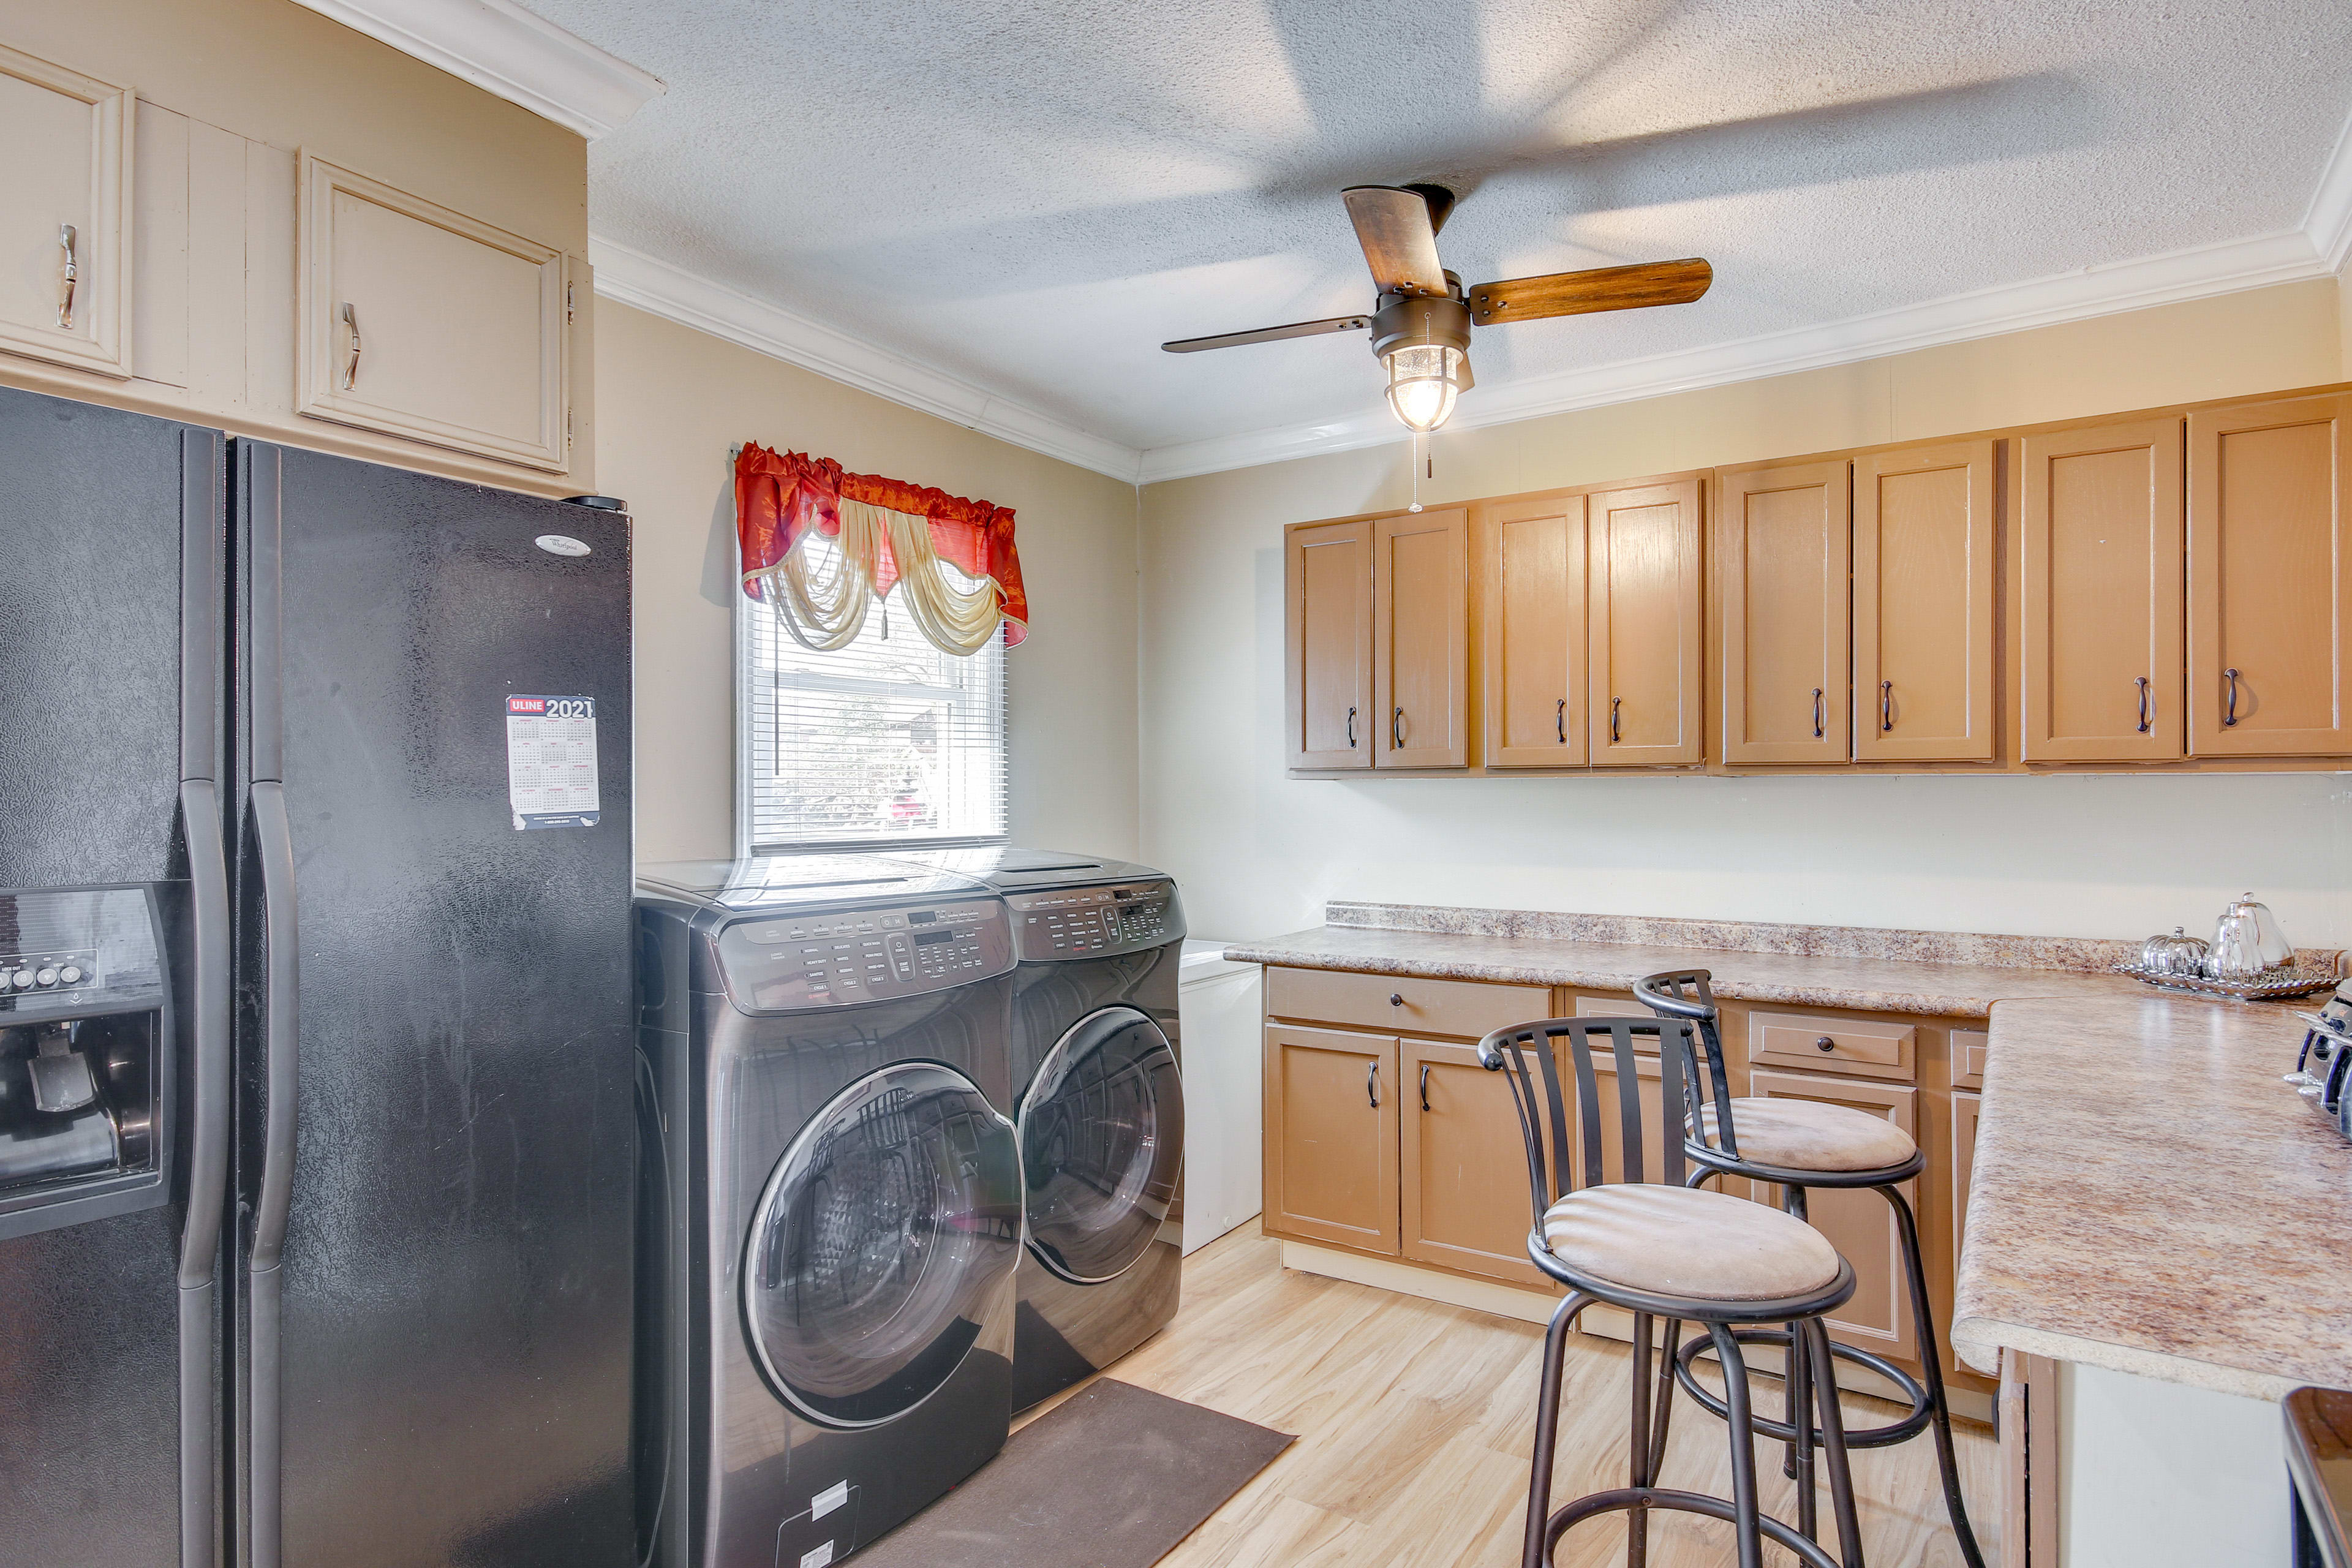 Laundry Area | Washer/Dryer | Iron/Board